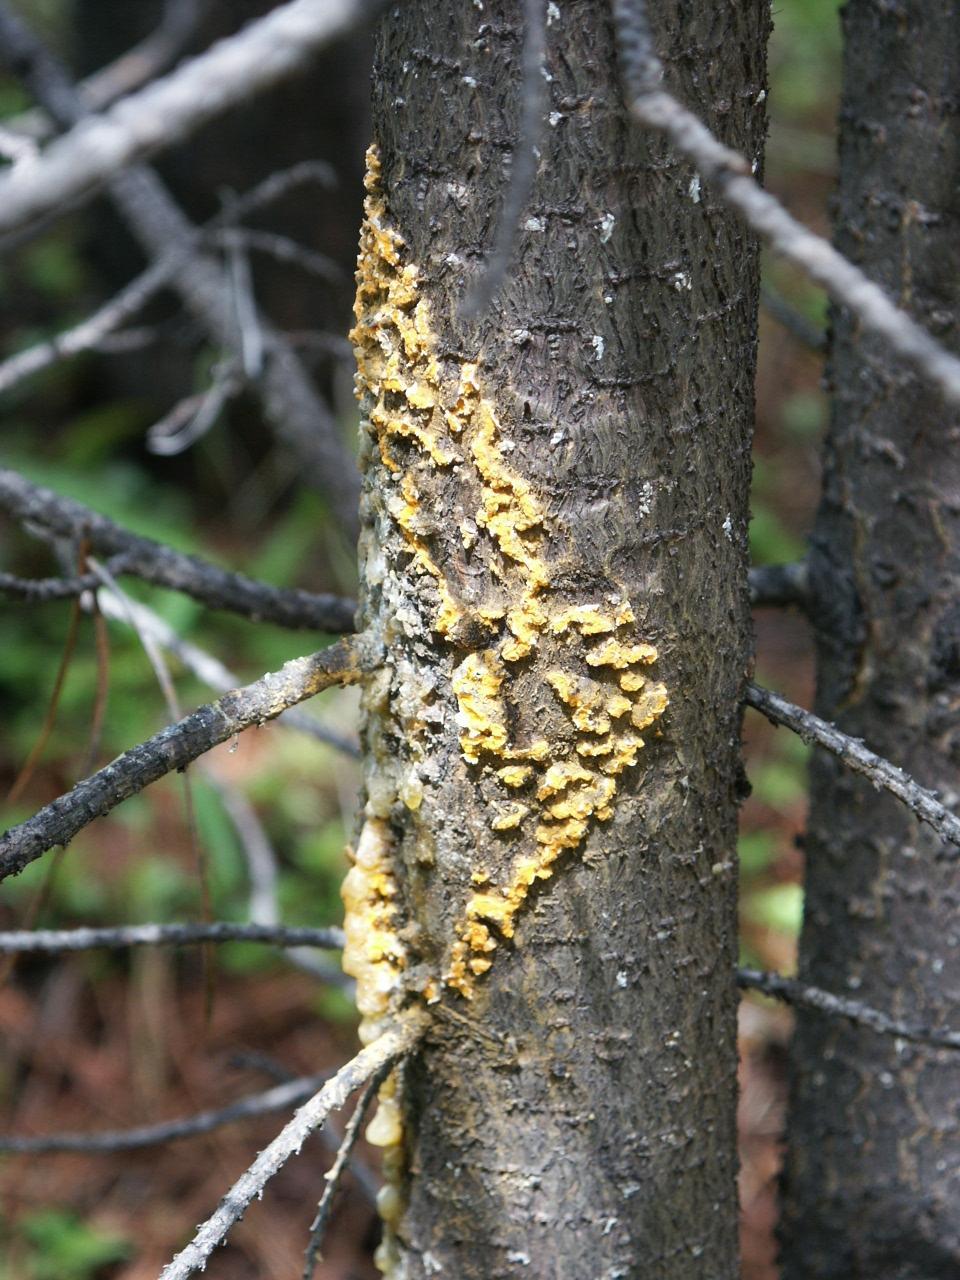 Foliar diseases are not the only forest pathogens that are increasing in both prevalence and significance in Central BC Hard pine rusts are too, including: